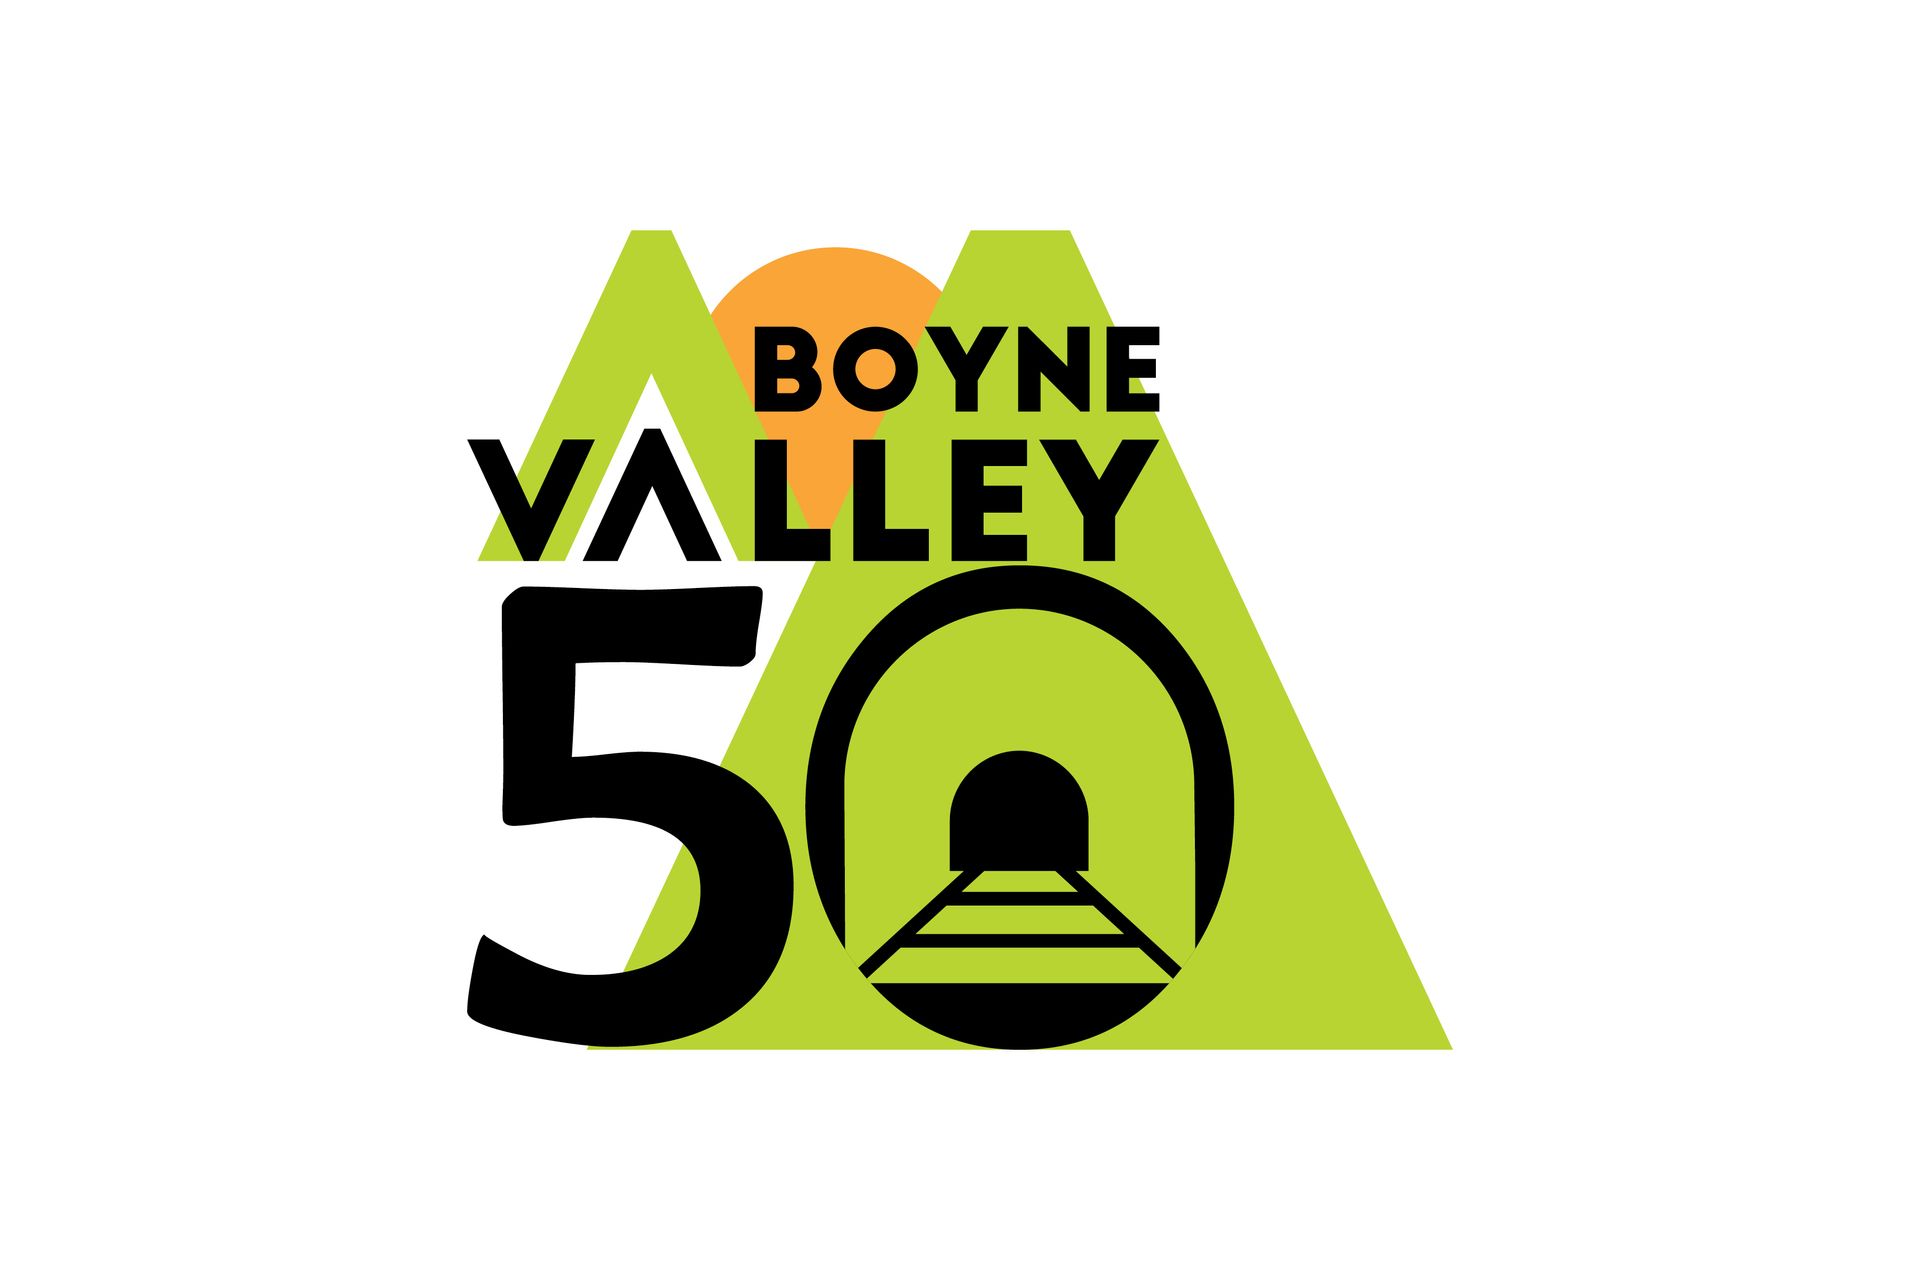 A multi-distance trail event along the Dawes Range section of the Boyne Burnett Inland Rail Trail from Builyan to Barrimoon. Opt for the full 50k, the 25k downhill, the 12k taster or the 6k teaser.